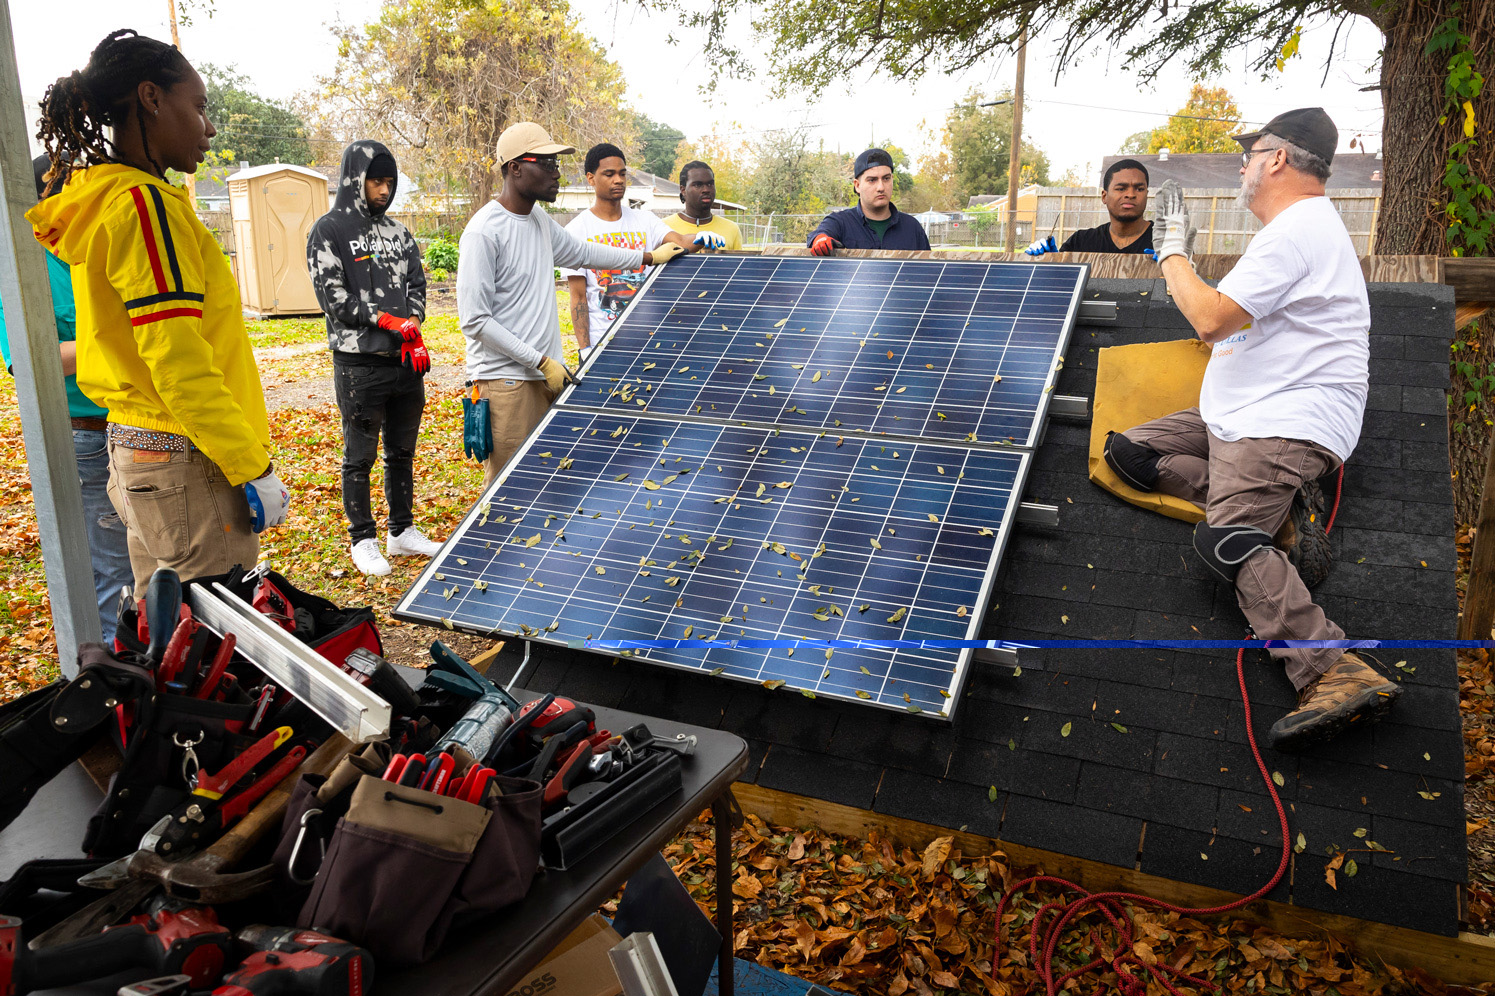 Participants listen to Mark McCollum, lead instructor for Green Careers Texas, during a solar panel installation training hosted by South Union Community Development Corporation on Friday, Dec. 8, 2023, in Sunnyside.